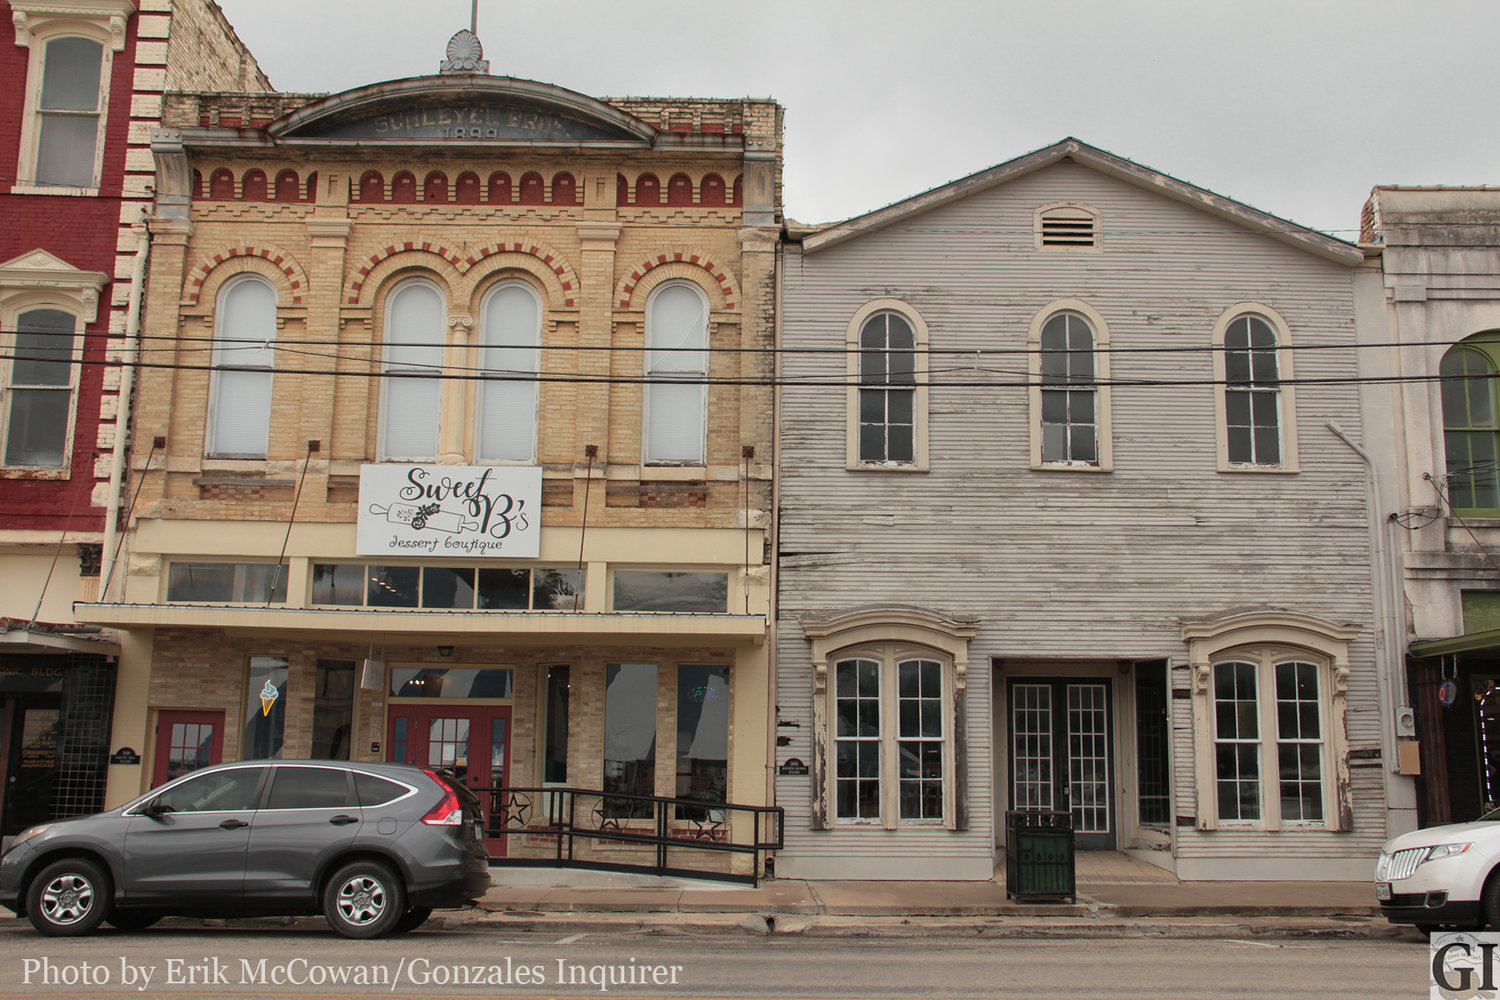 A proposed city historical ordinance would go a long way in revitalizing downtown buildings, some say. The 1899 Schleyer Bros. Building, left, home to Sweet B's Dessert Boutique, is a prime example of what a proper renovation with city backing can look like. On the other hand, the 1886 Beringer-Coleman Building, right, is a poster child on why an ordinance might be beneficial to the city.